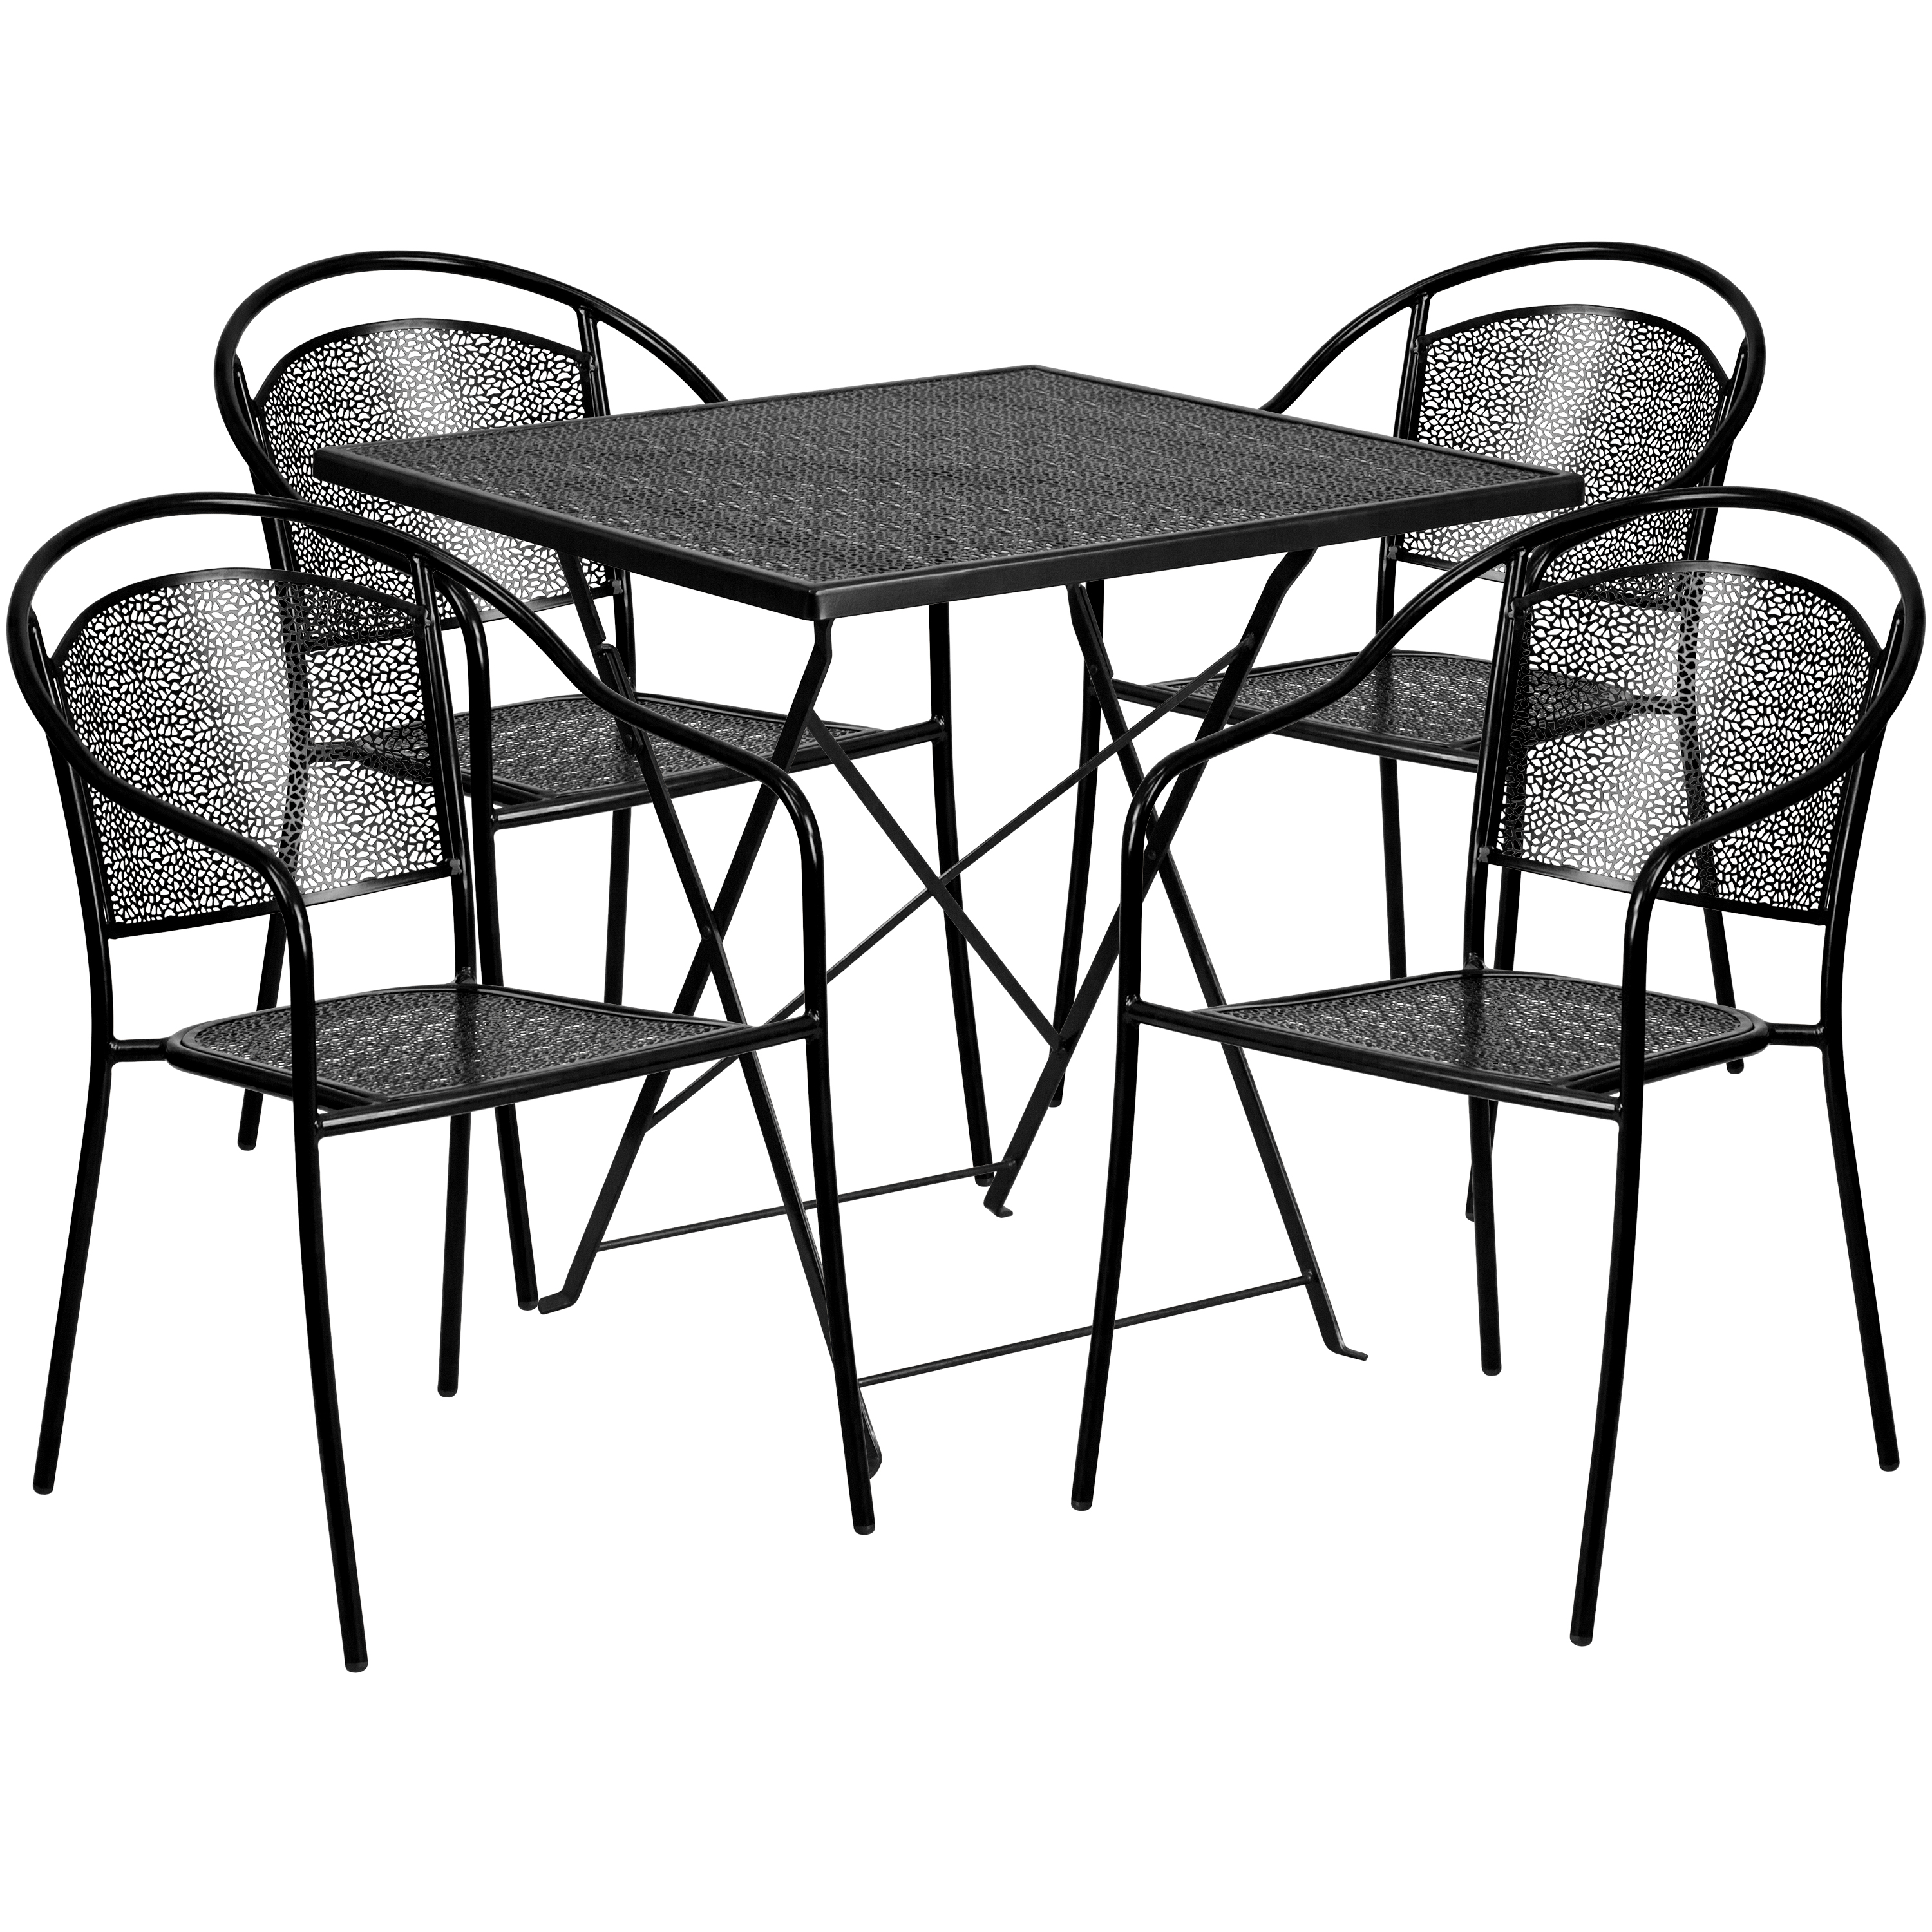 Flash Furniture CO-28SQF-03CHR4-BK-GG 28" Square Black Indoor/Outdoor Steel Folding Patio Table Set with 4 Round Back Chairs